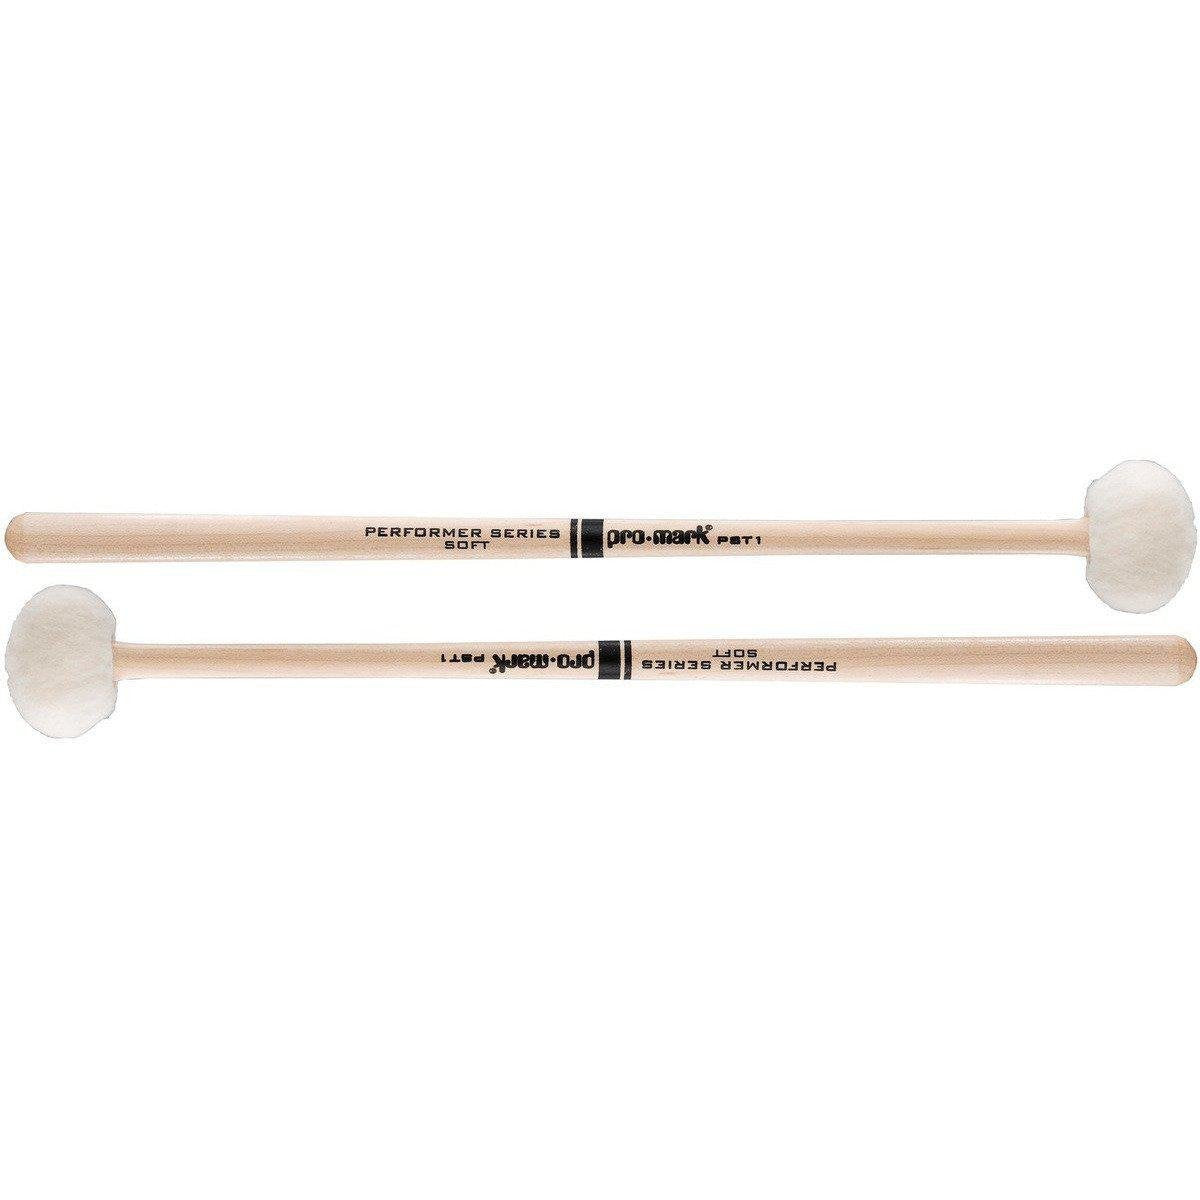 ProMark Performer Series Soft PST1 Maple Timpani Mallets-Andy's Music